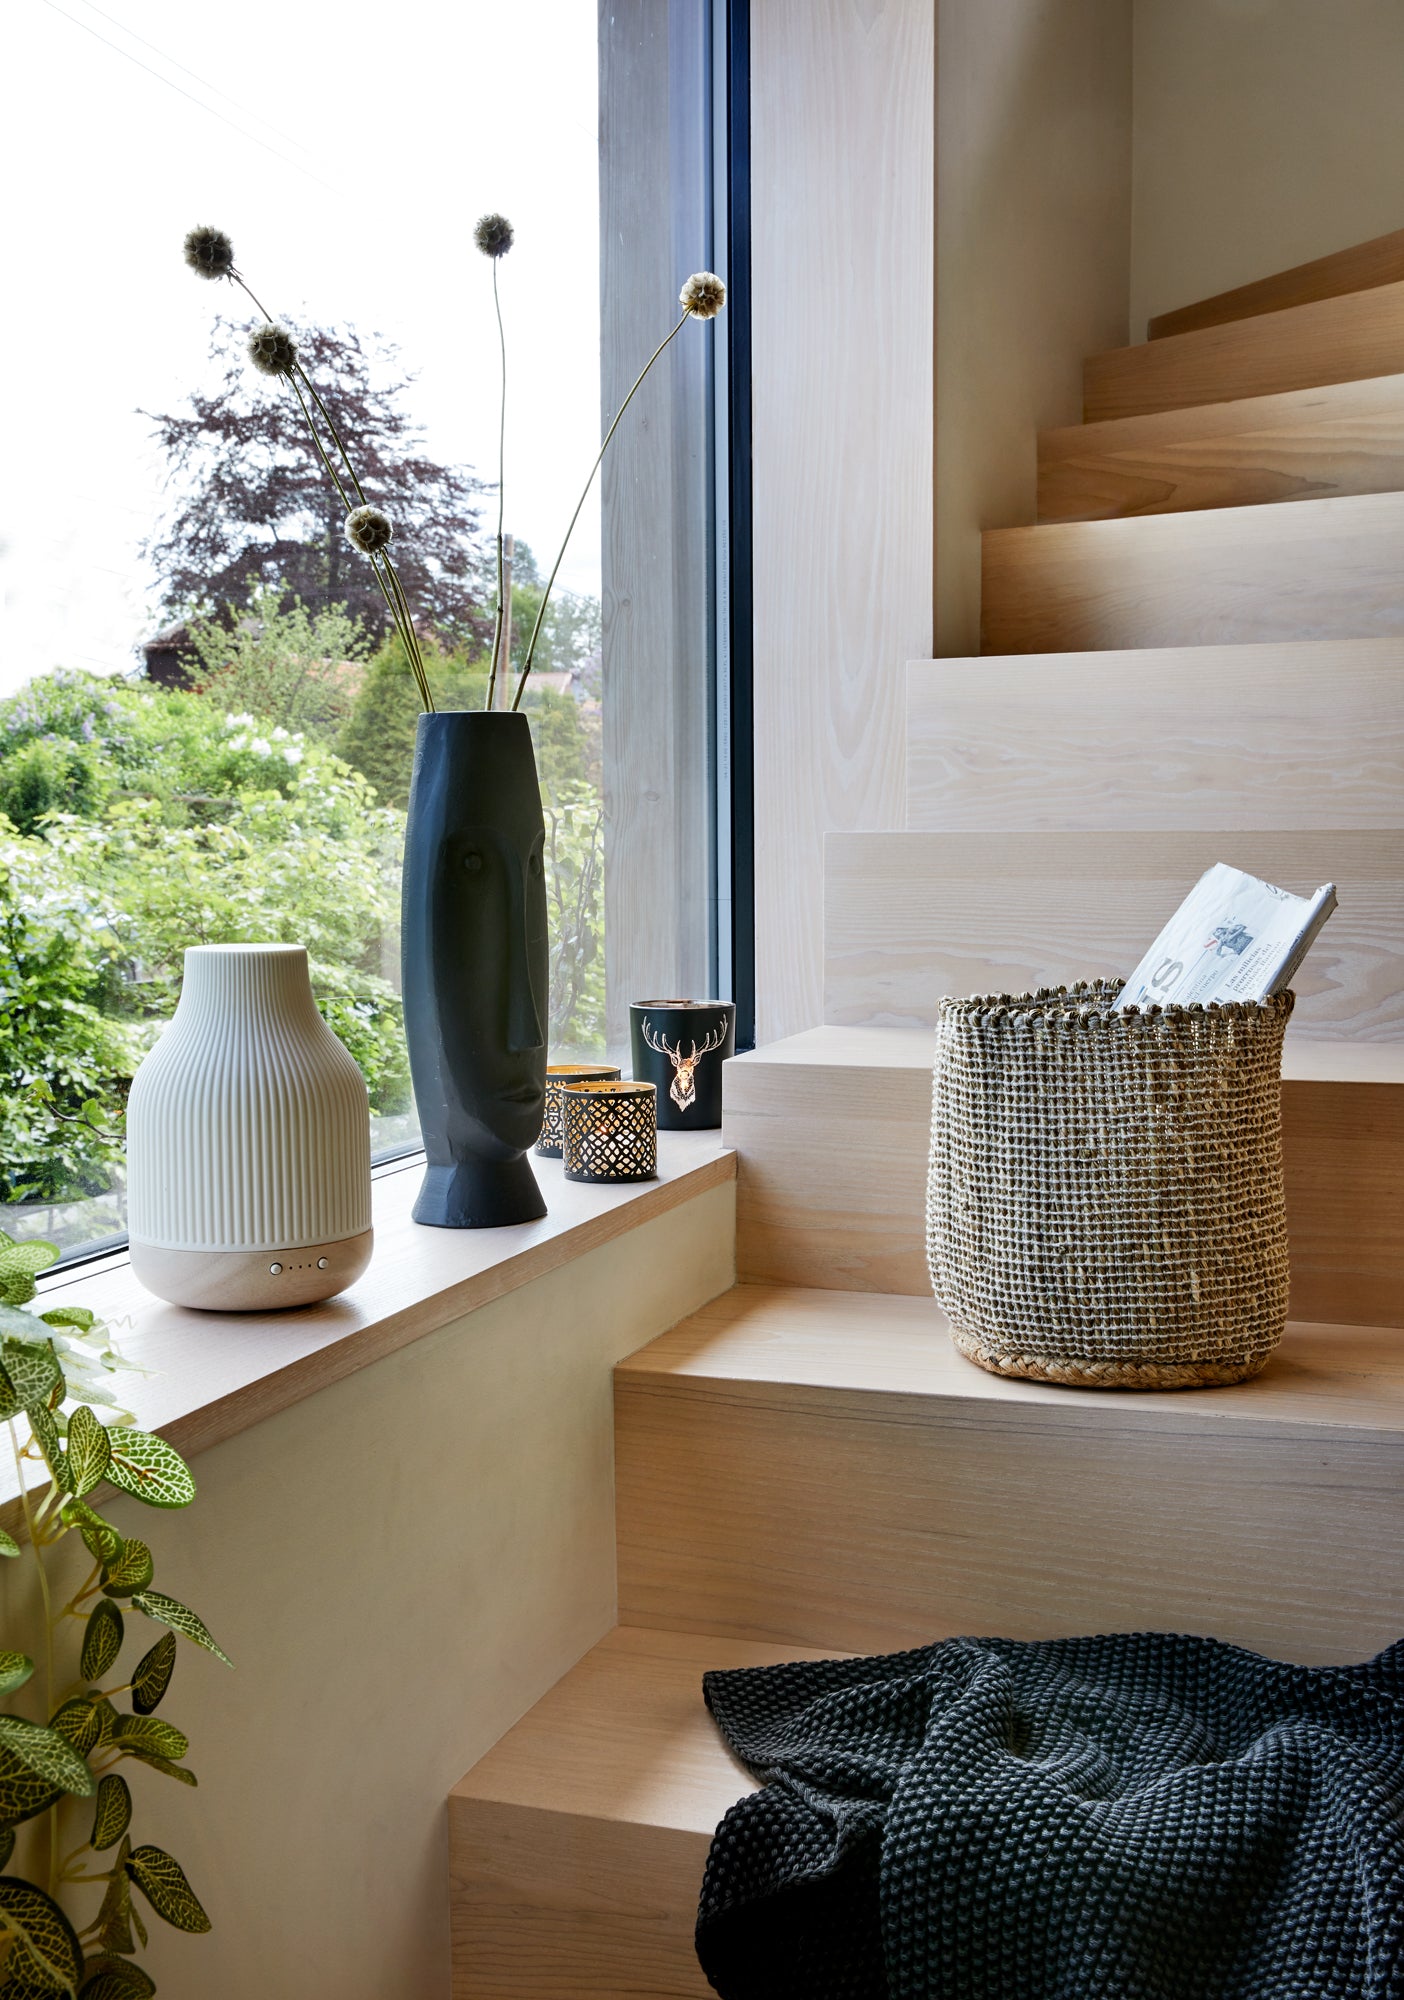 diffuser in window next to stair surrounded by home decor